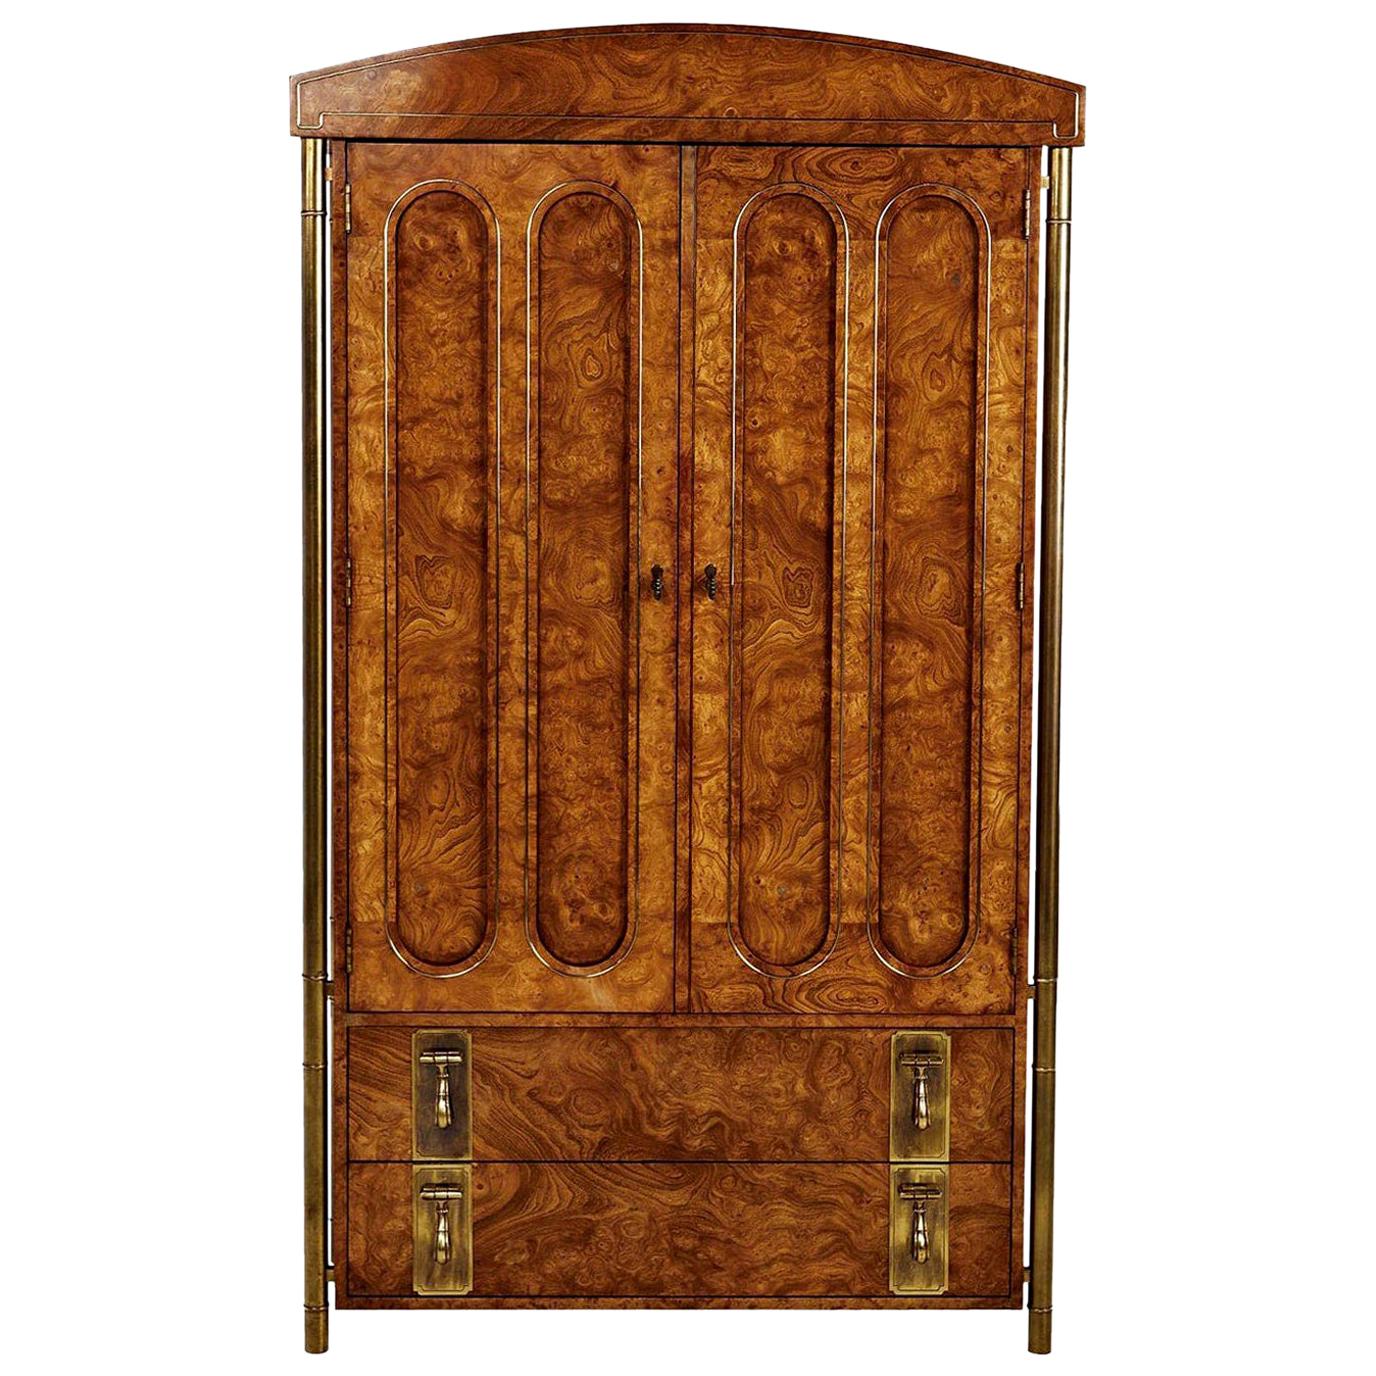 Breathtaking burl wood and brass Mastercraft armoire. Four tubular outer skeletal brass support legs create a floating effect. The columns are fashioned in the style of bamboo stalks to add an Eastern flare. Hollywood Regency and Asian Modern meld